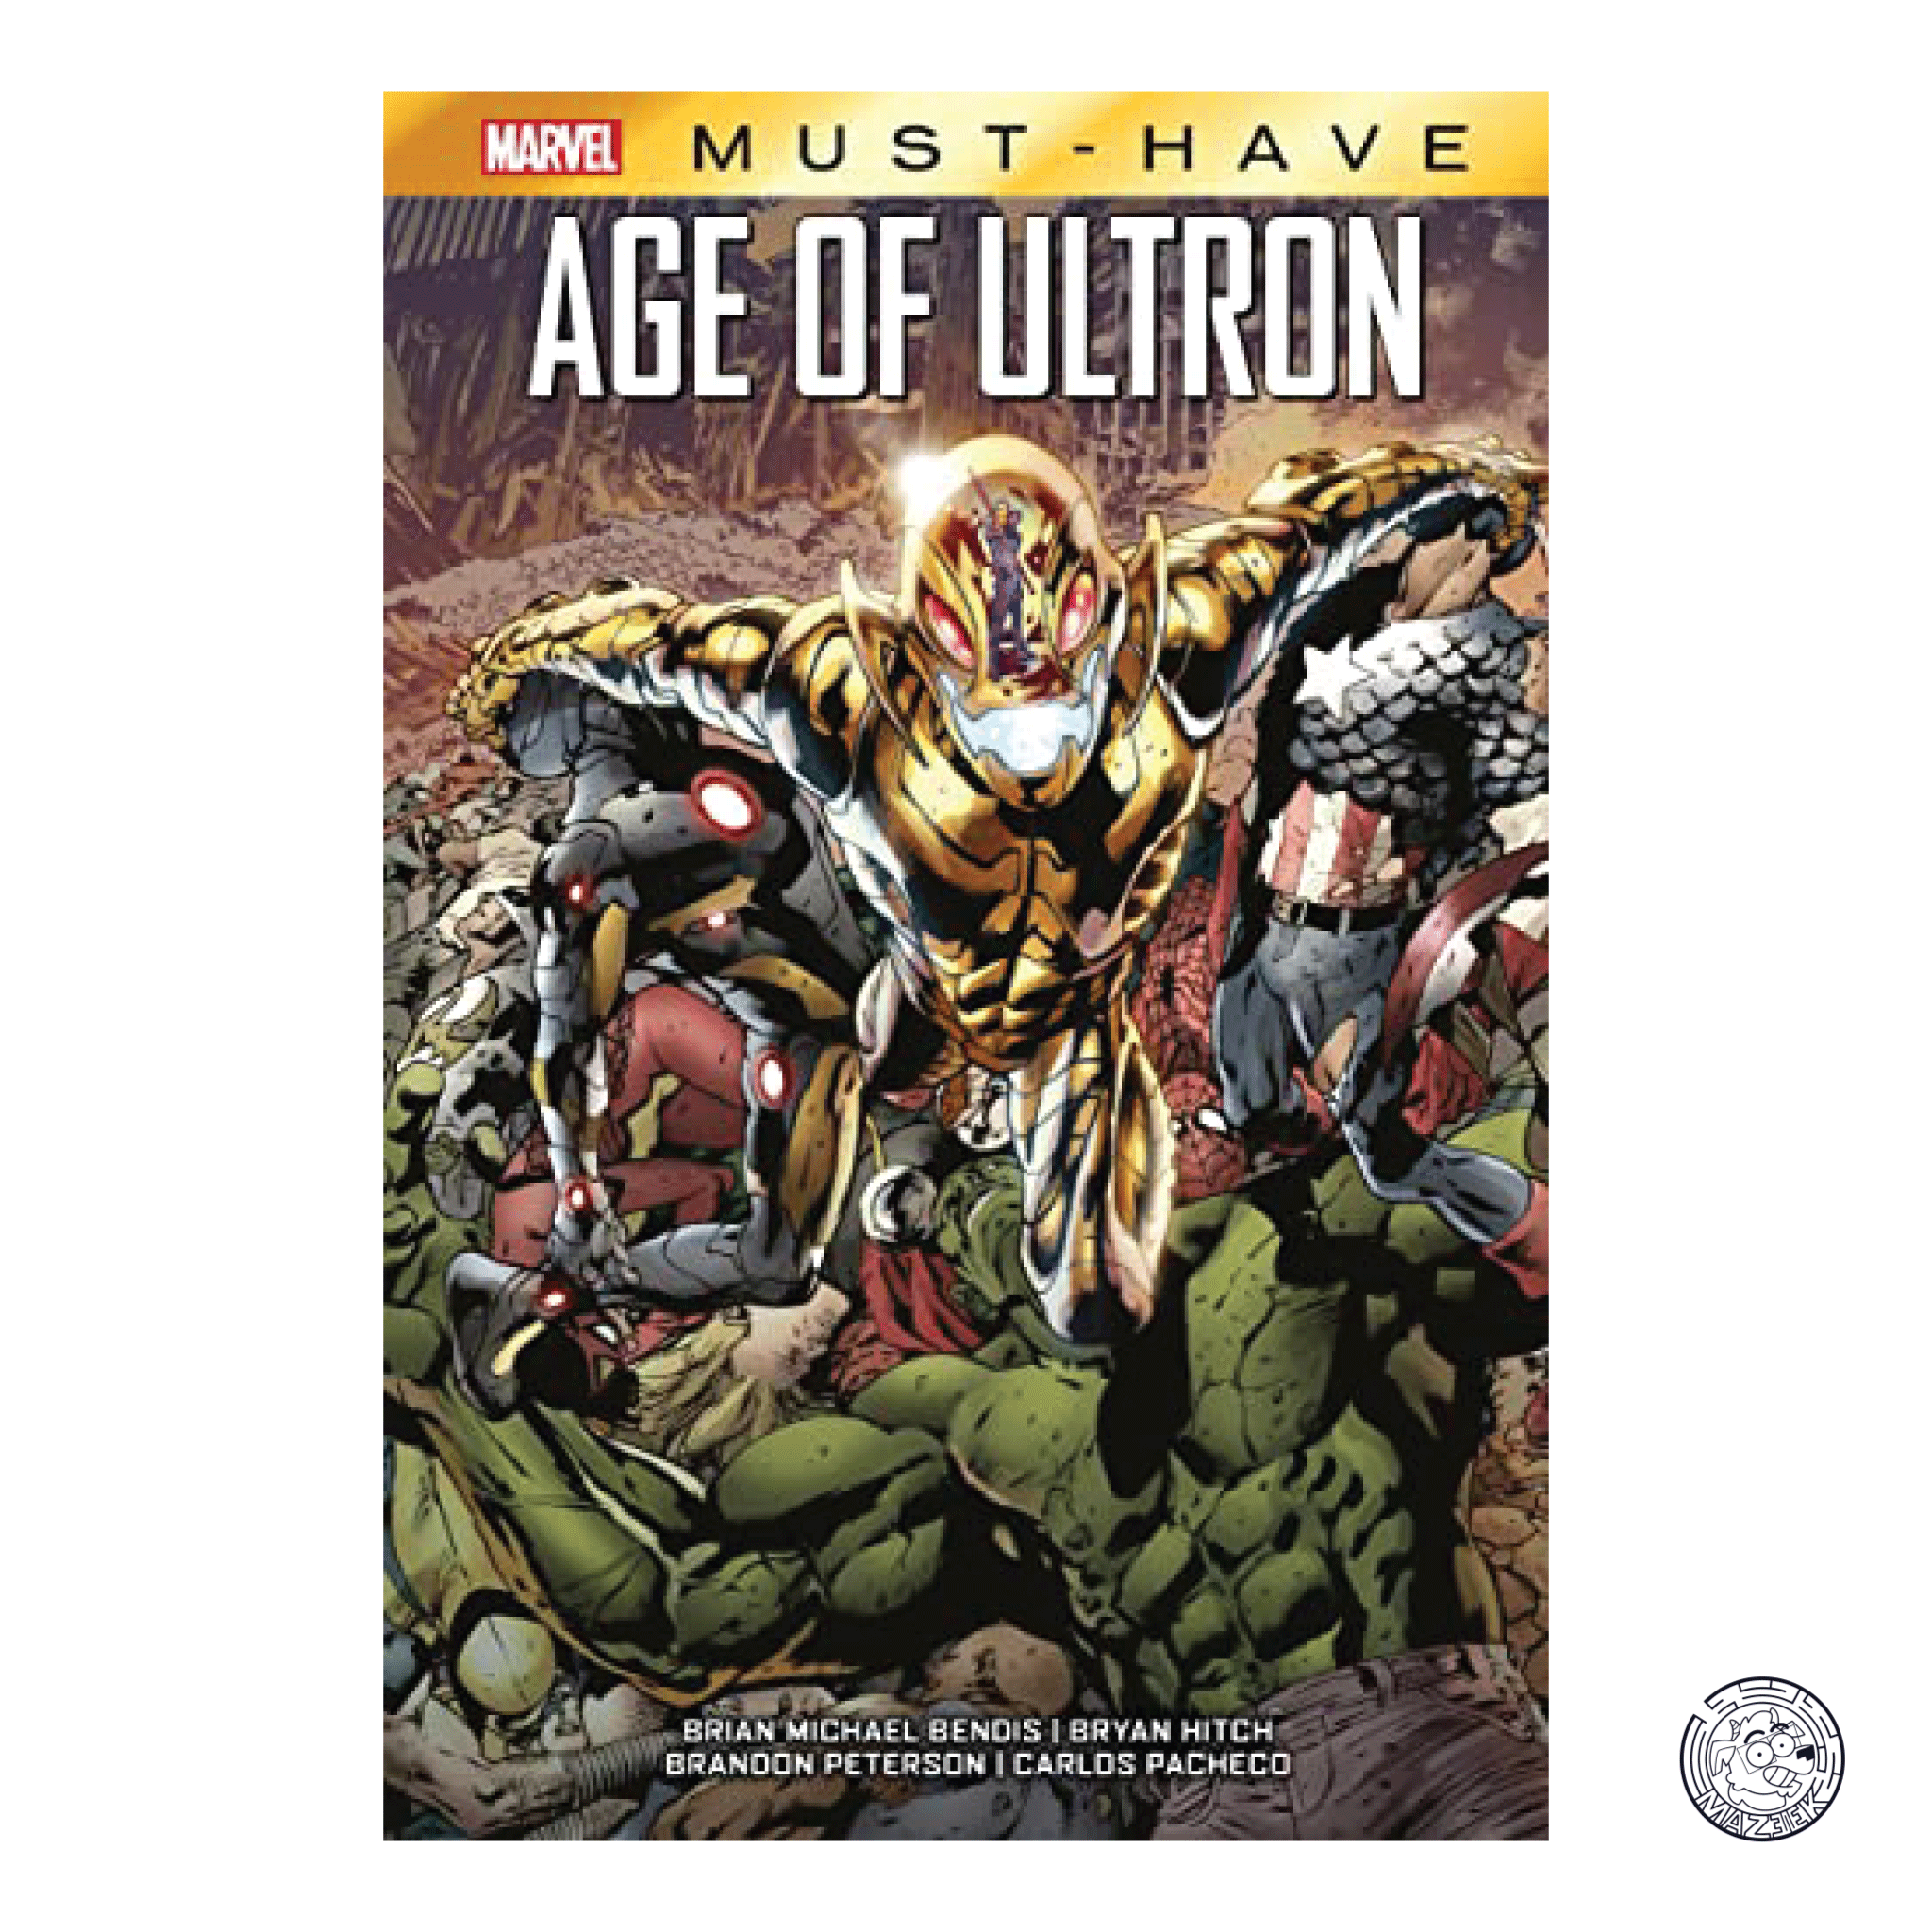 Marvel Must Have - Age of Ultron